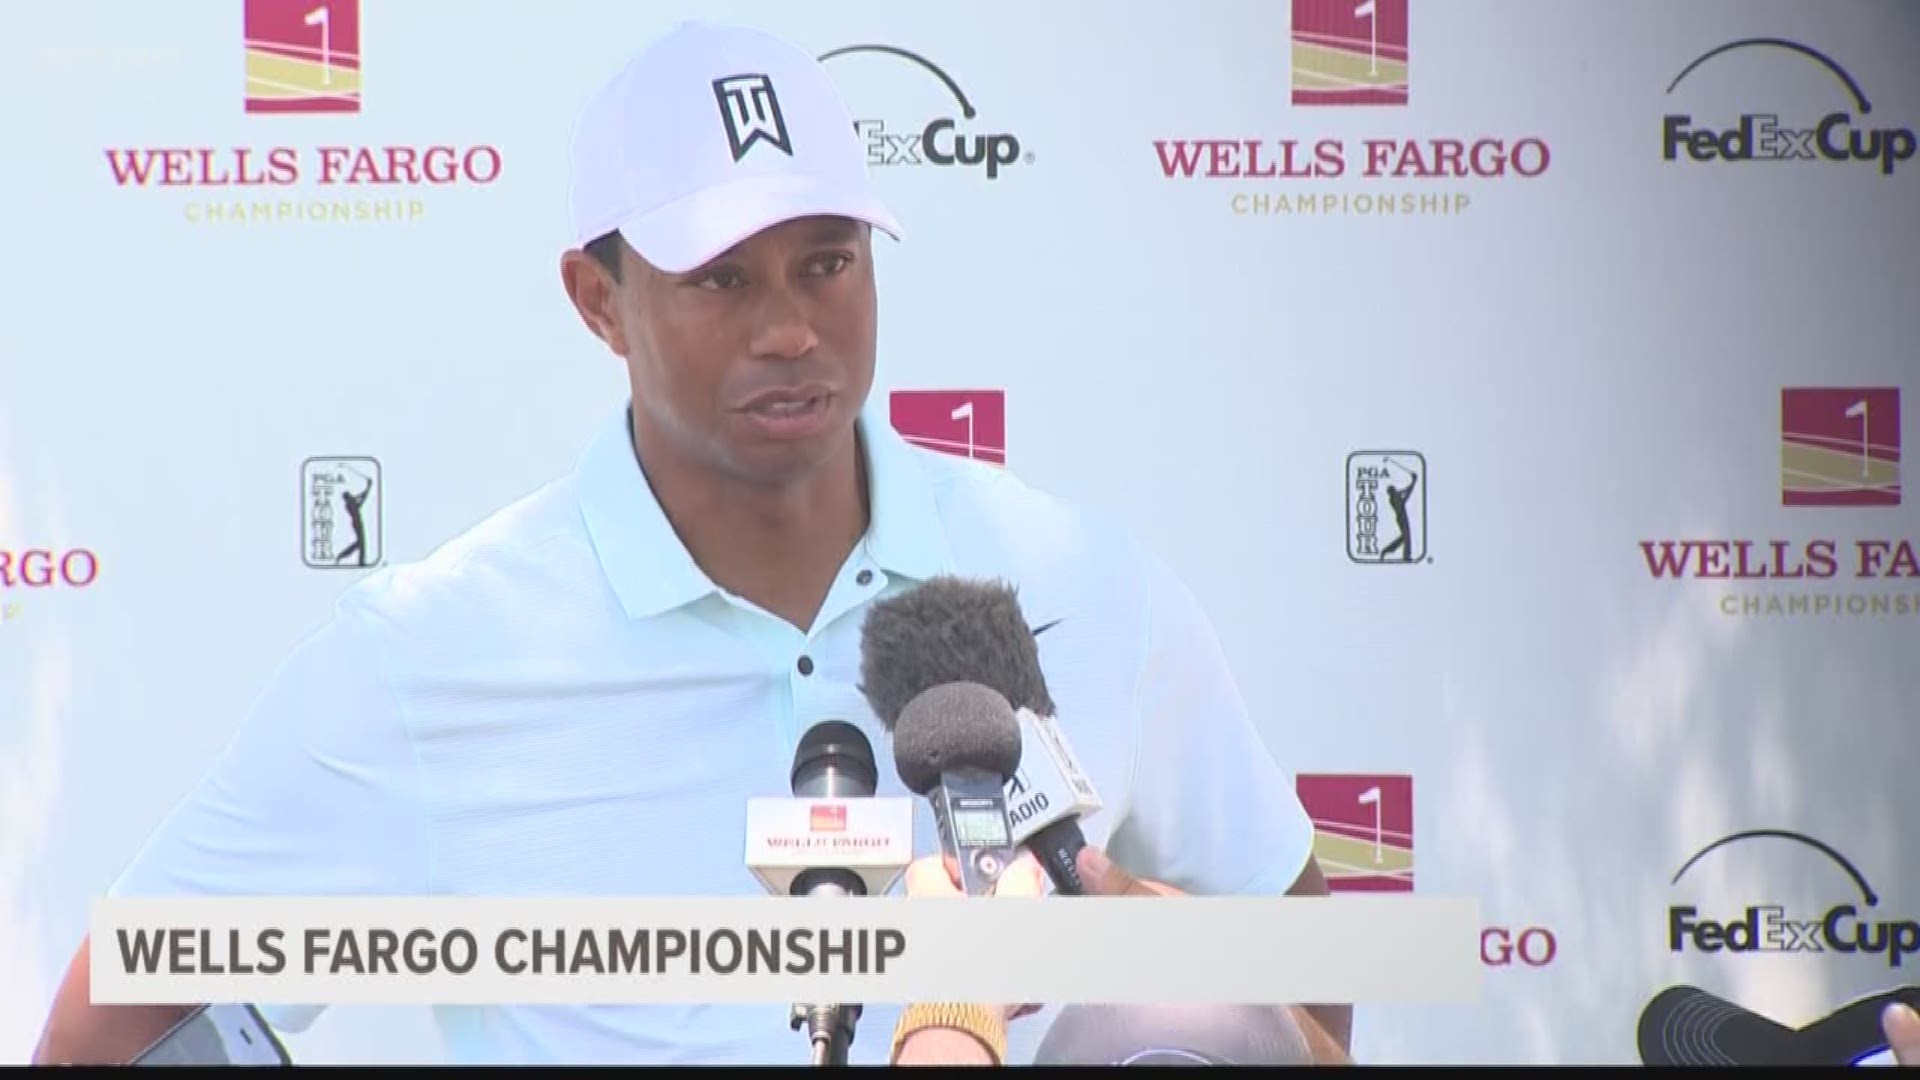 After rolling in his only birdie of the day on his final hole, Tiger Woods deadpanned "I'm on a hot streak".. 